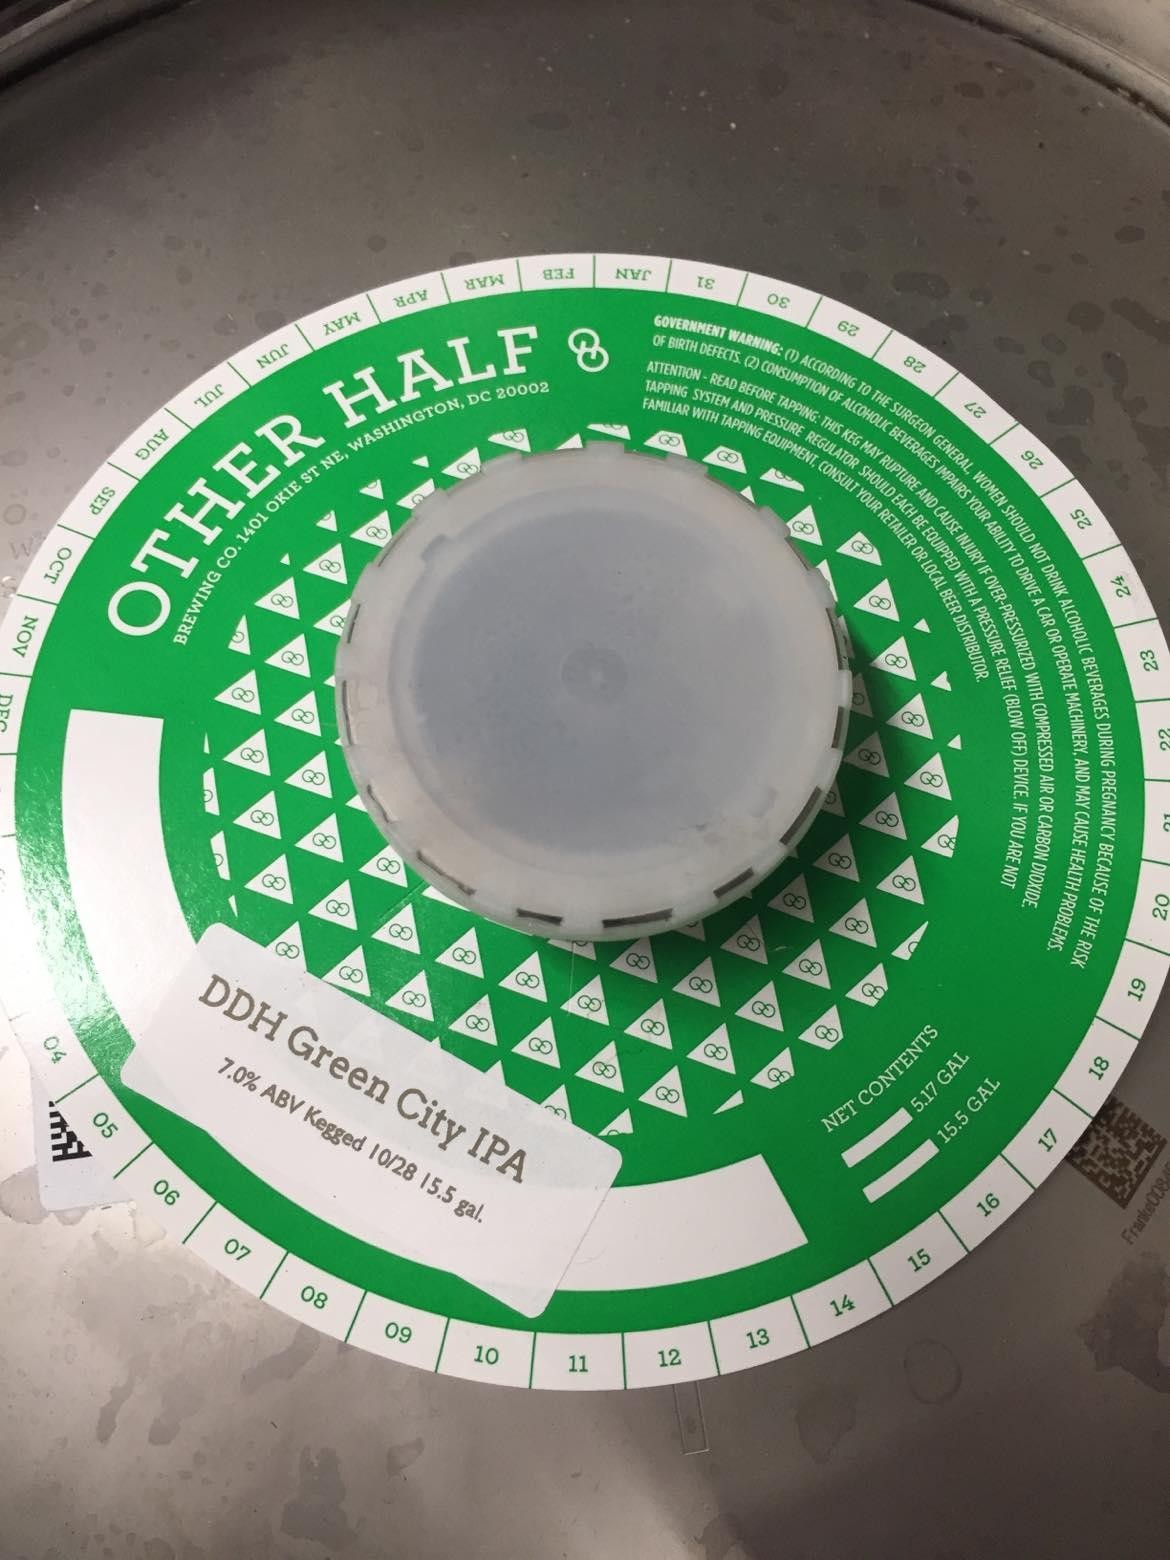 Other Half-DDH Green City IPA